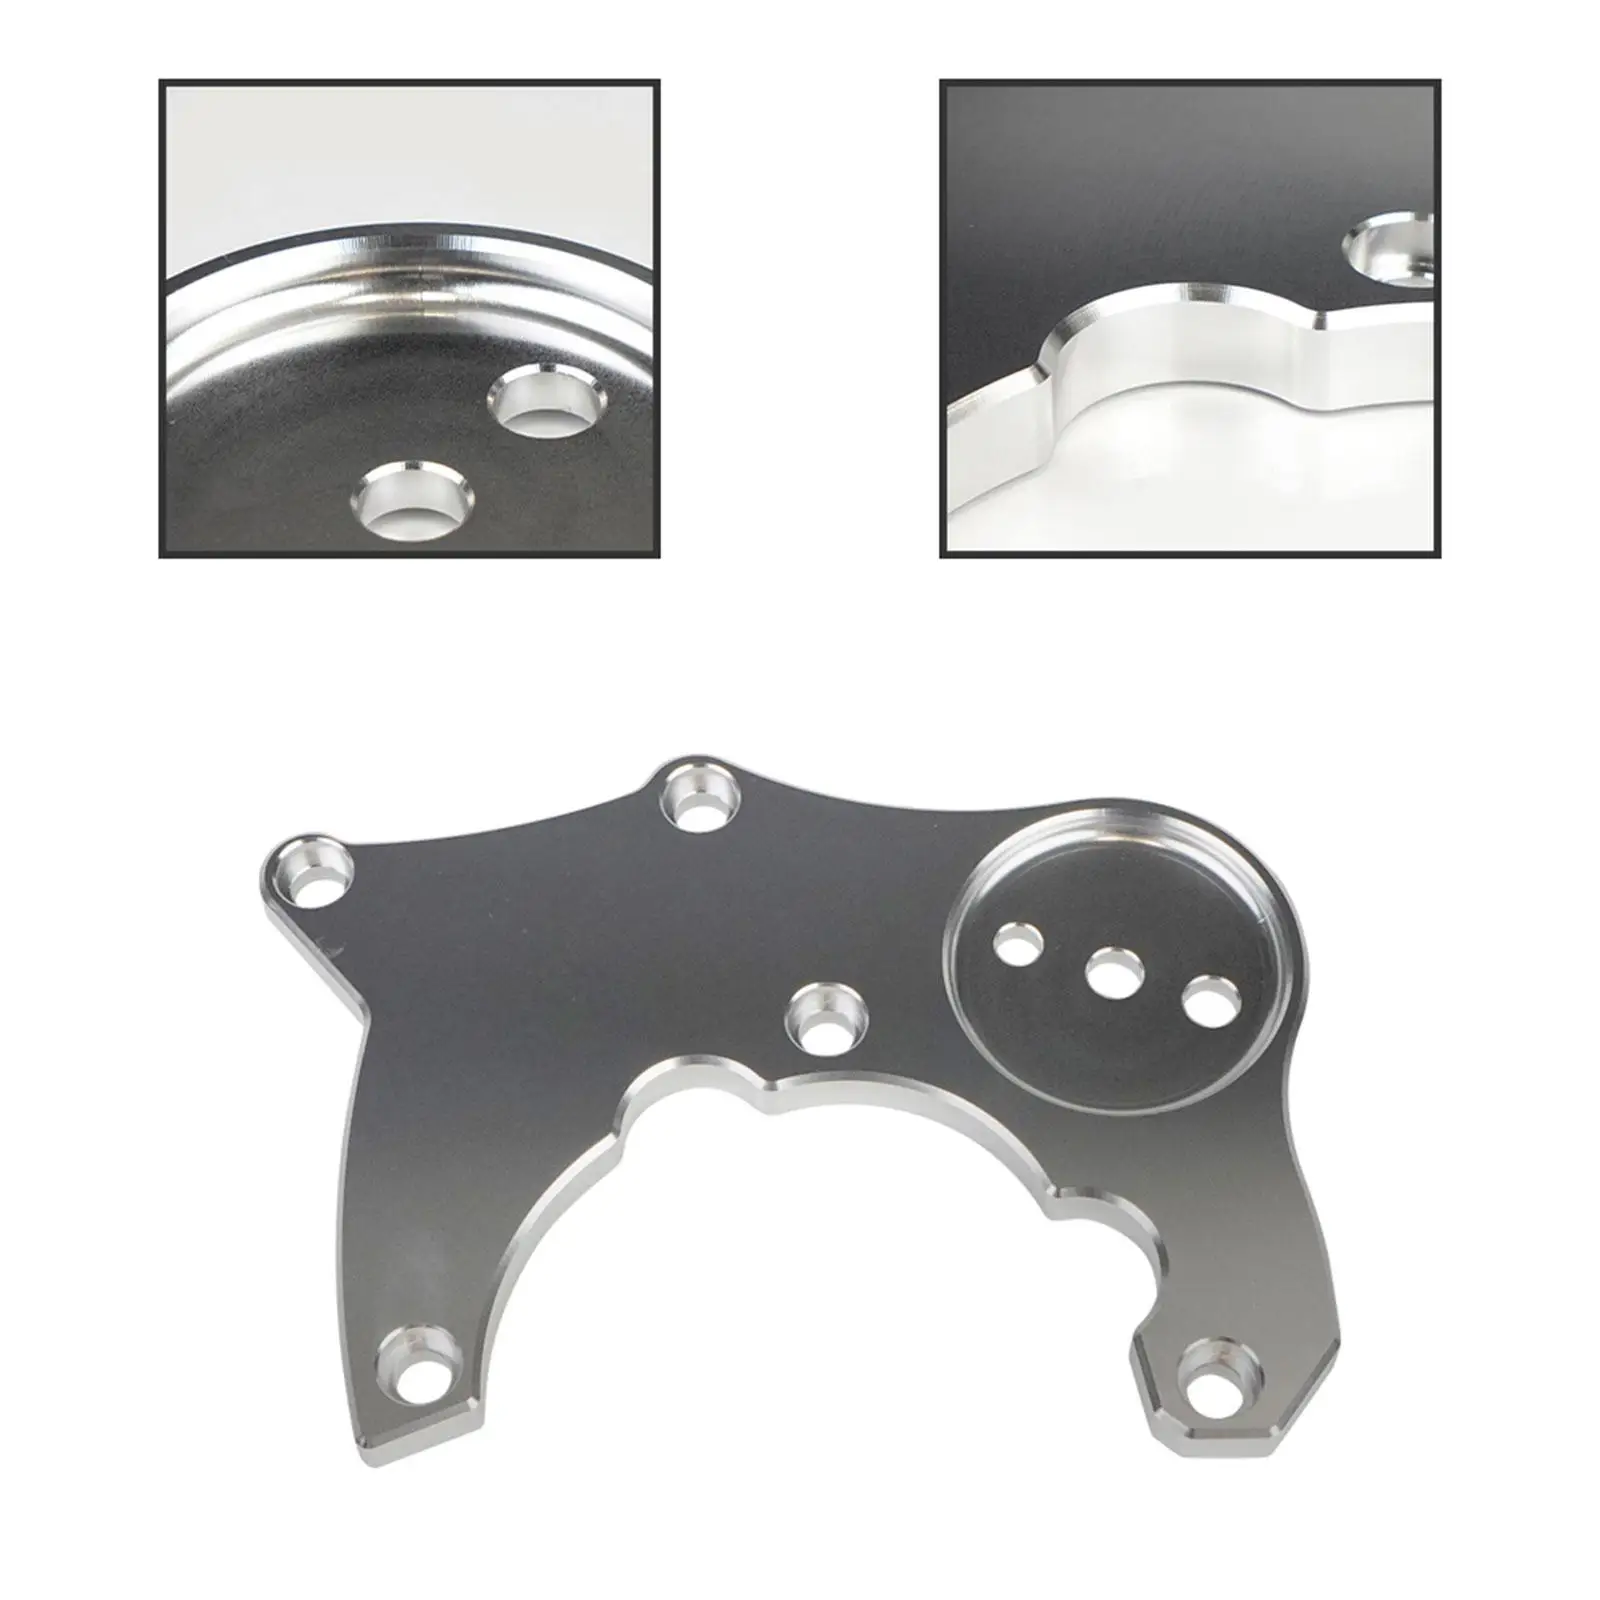 Mount Bracket Sturdy Replace Accessories Main Bracket for LS R4